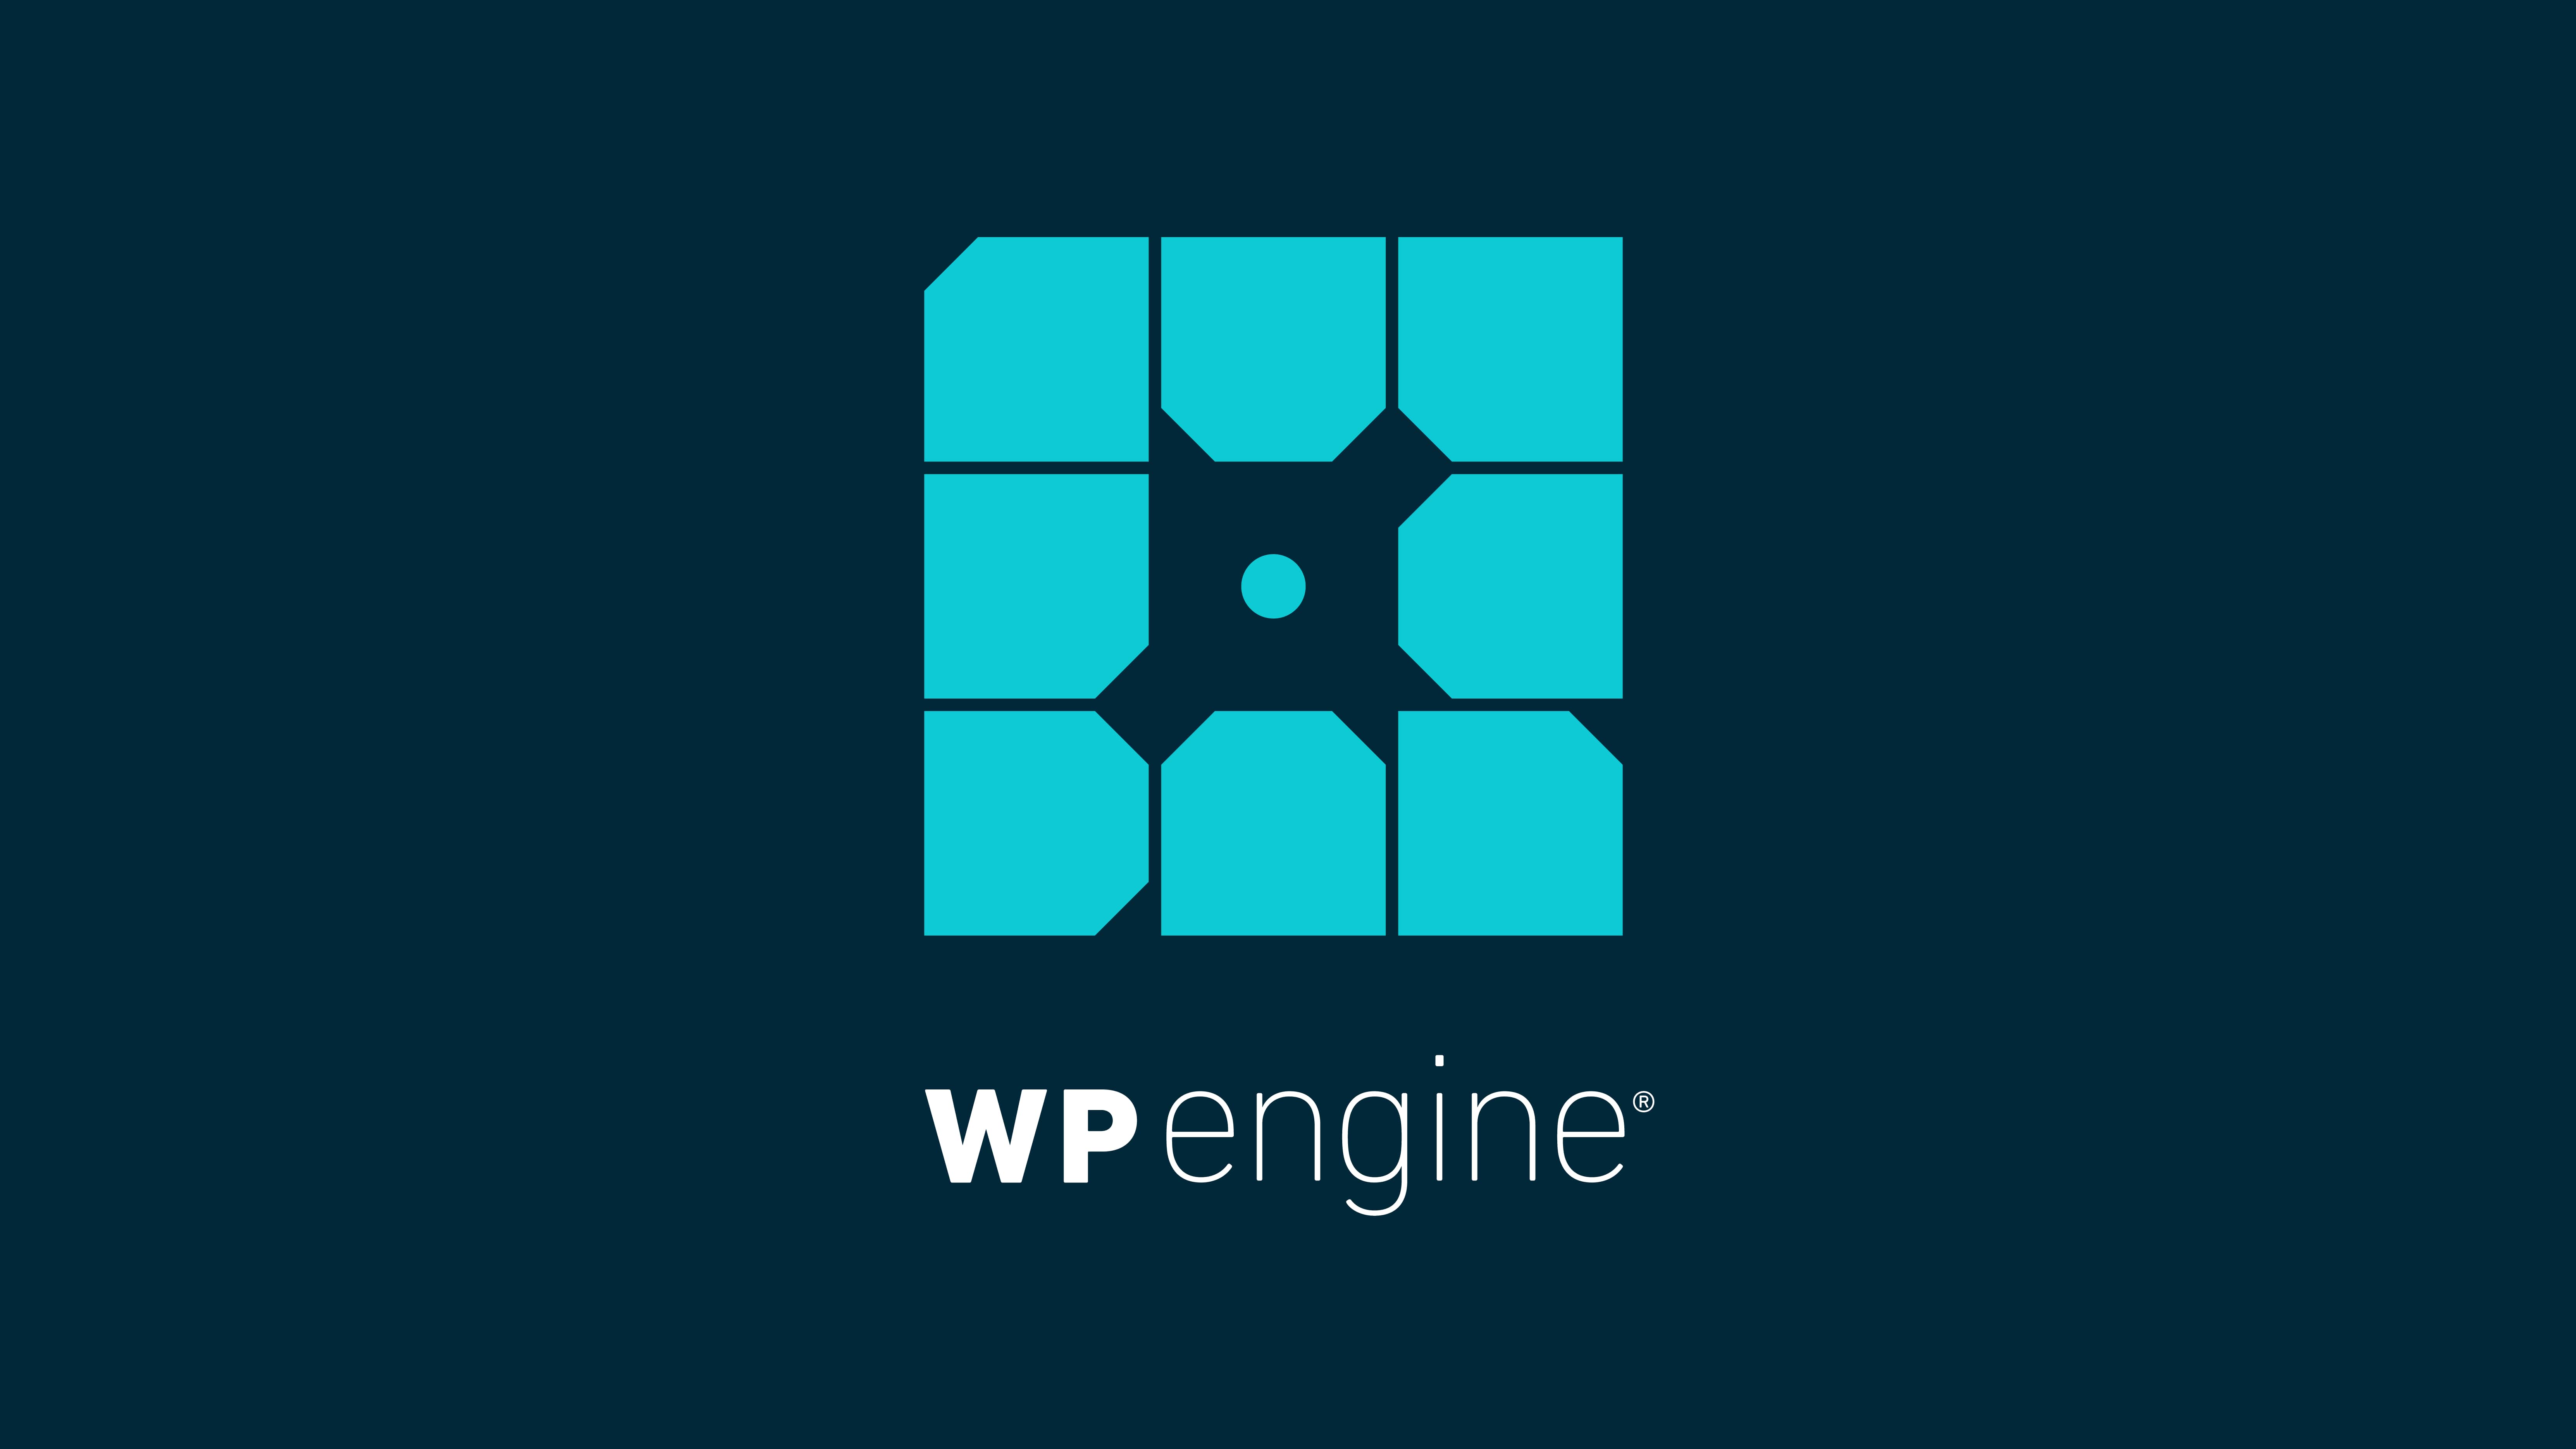 WP Engine logo in turquoise with dark blue background